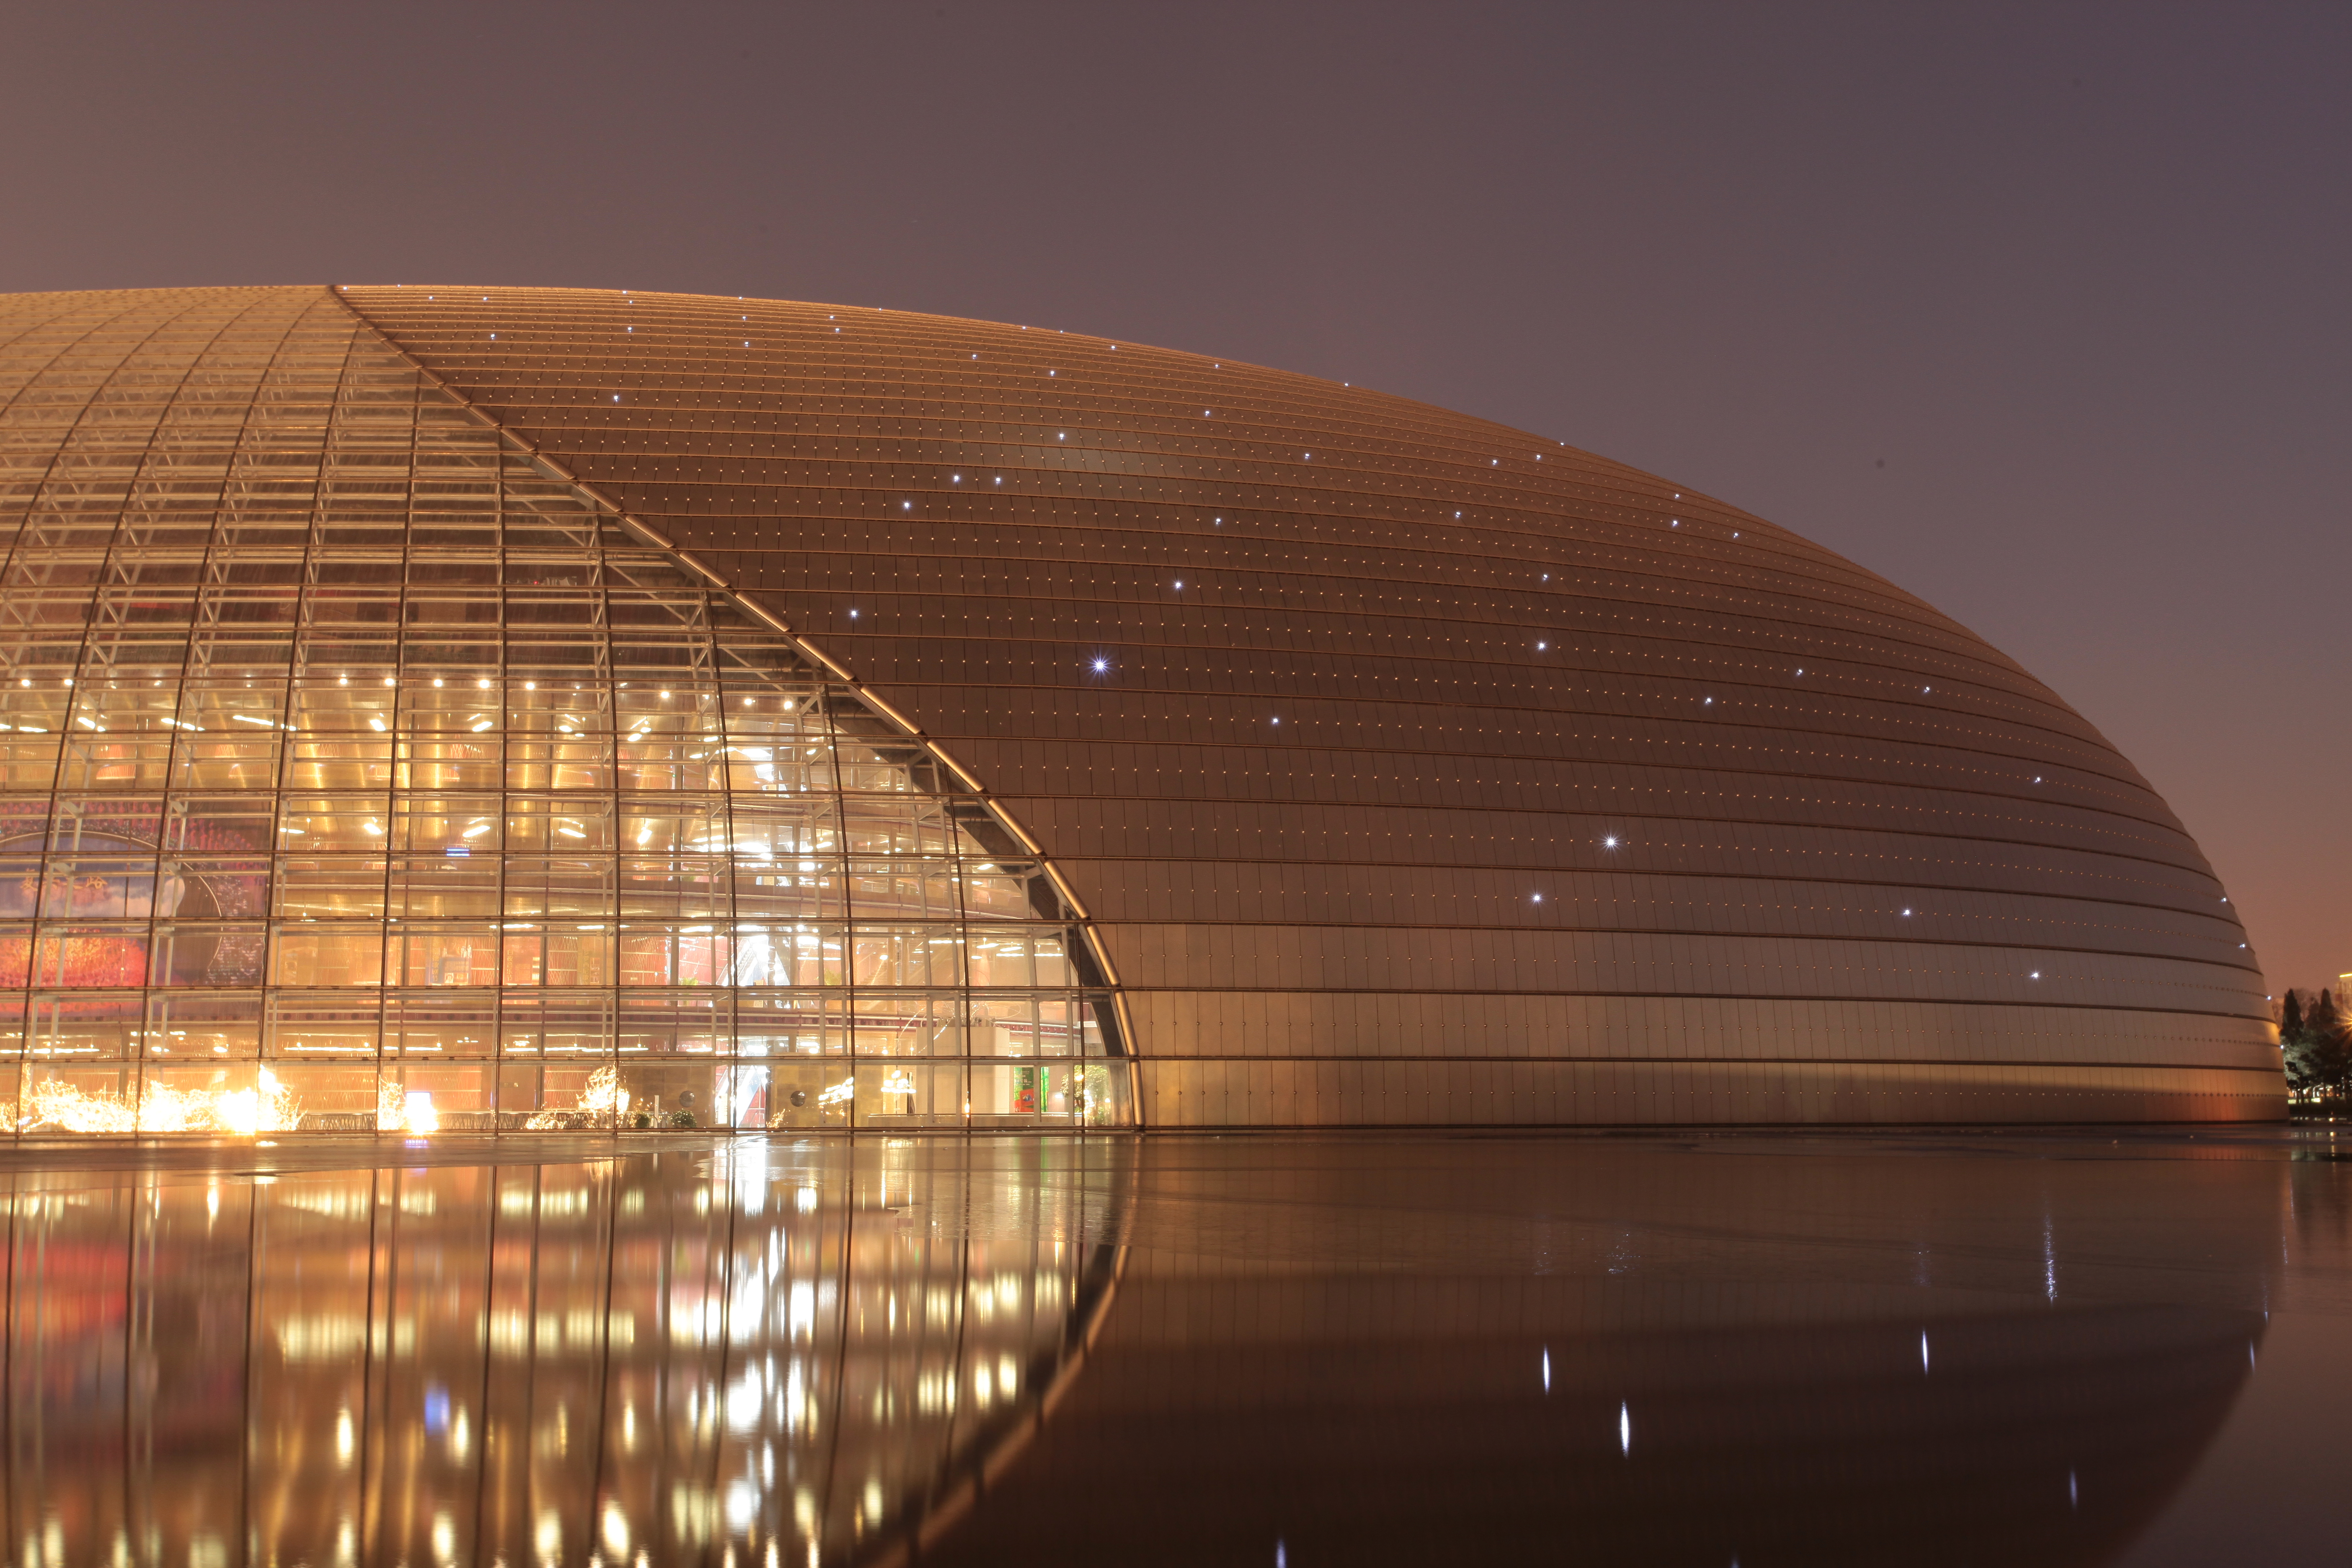 HQ Beijing National Grand Theatre Wallpapers | File 7295.6Kb